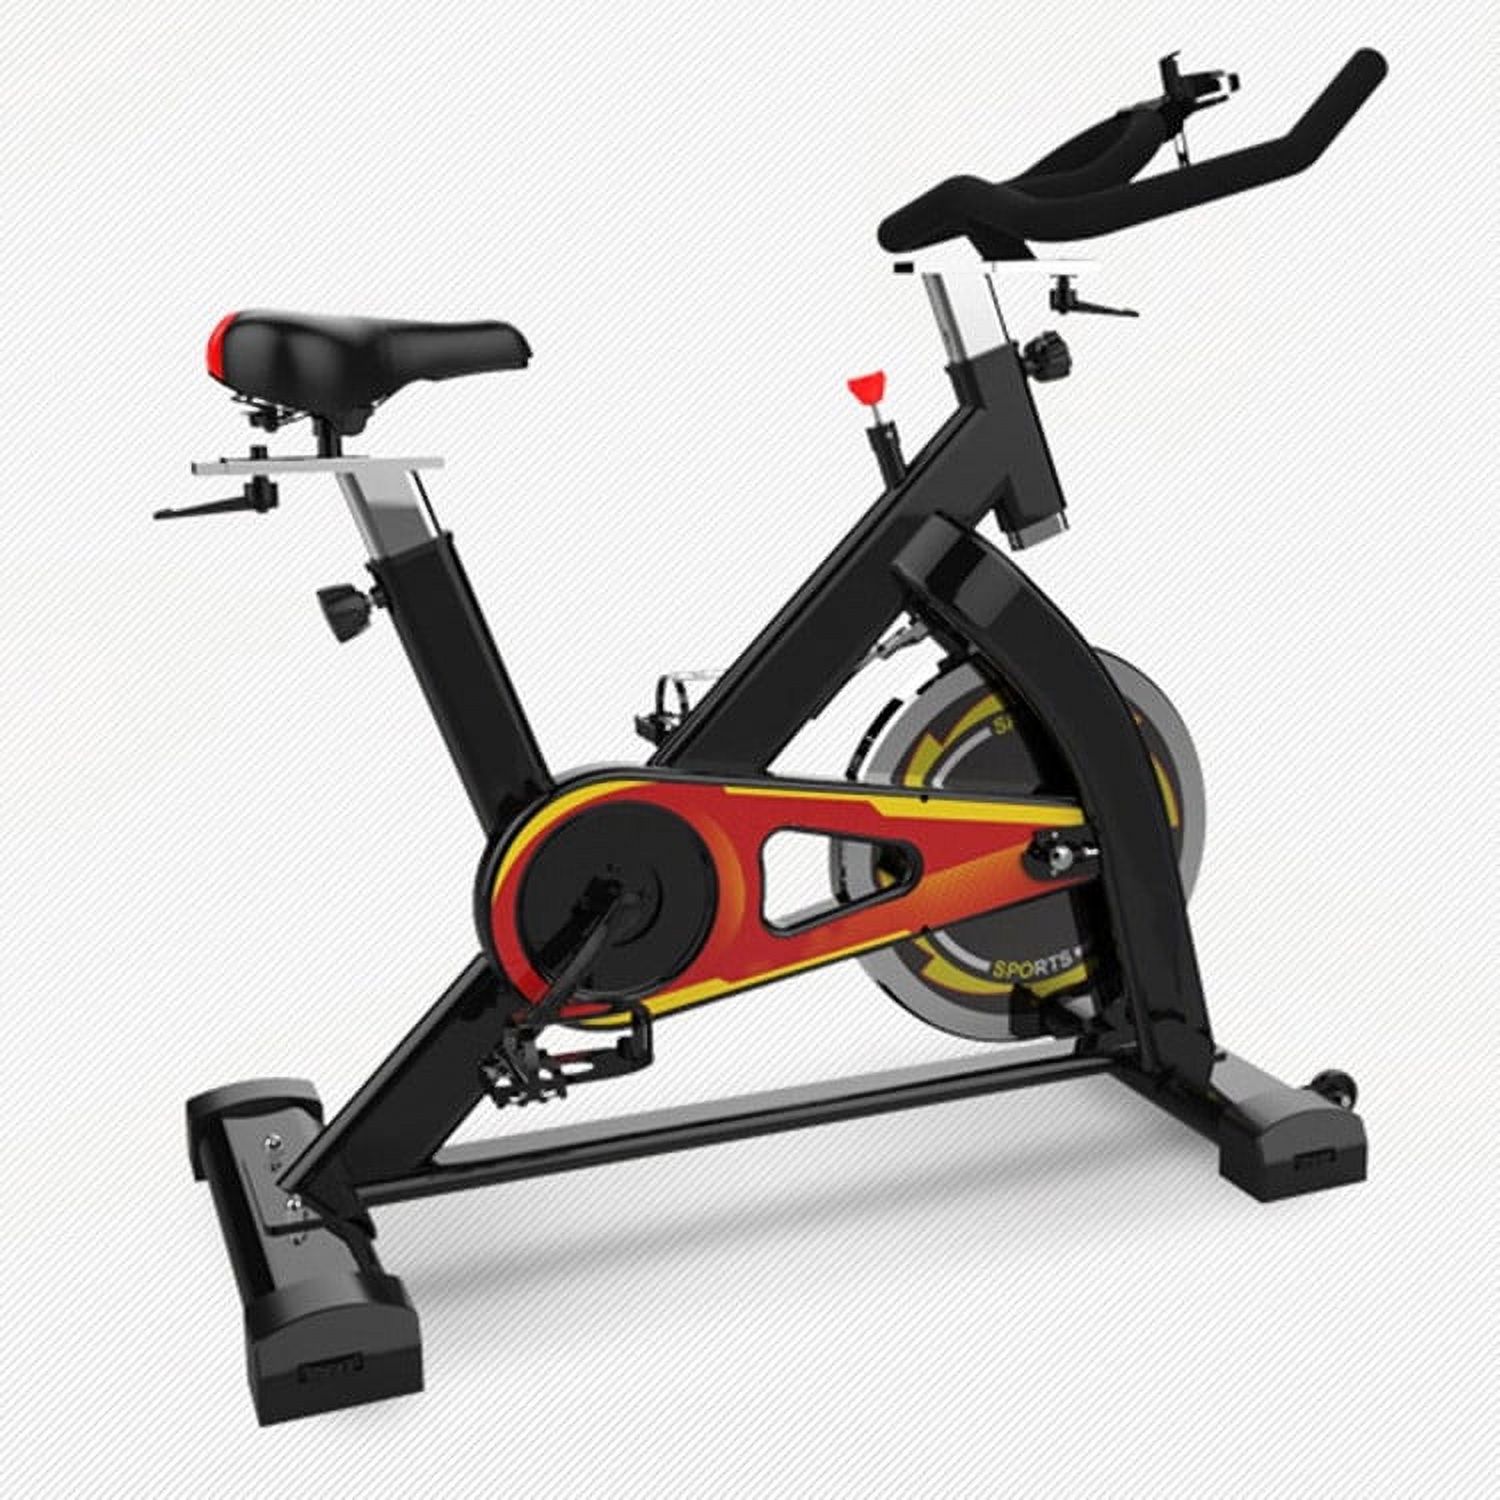 Stationary Exercise Bicycle Trainer Fitness Cardio Aerobic Exercise Bicycle Trainer S500(Black) - image 1 of 6